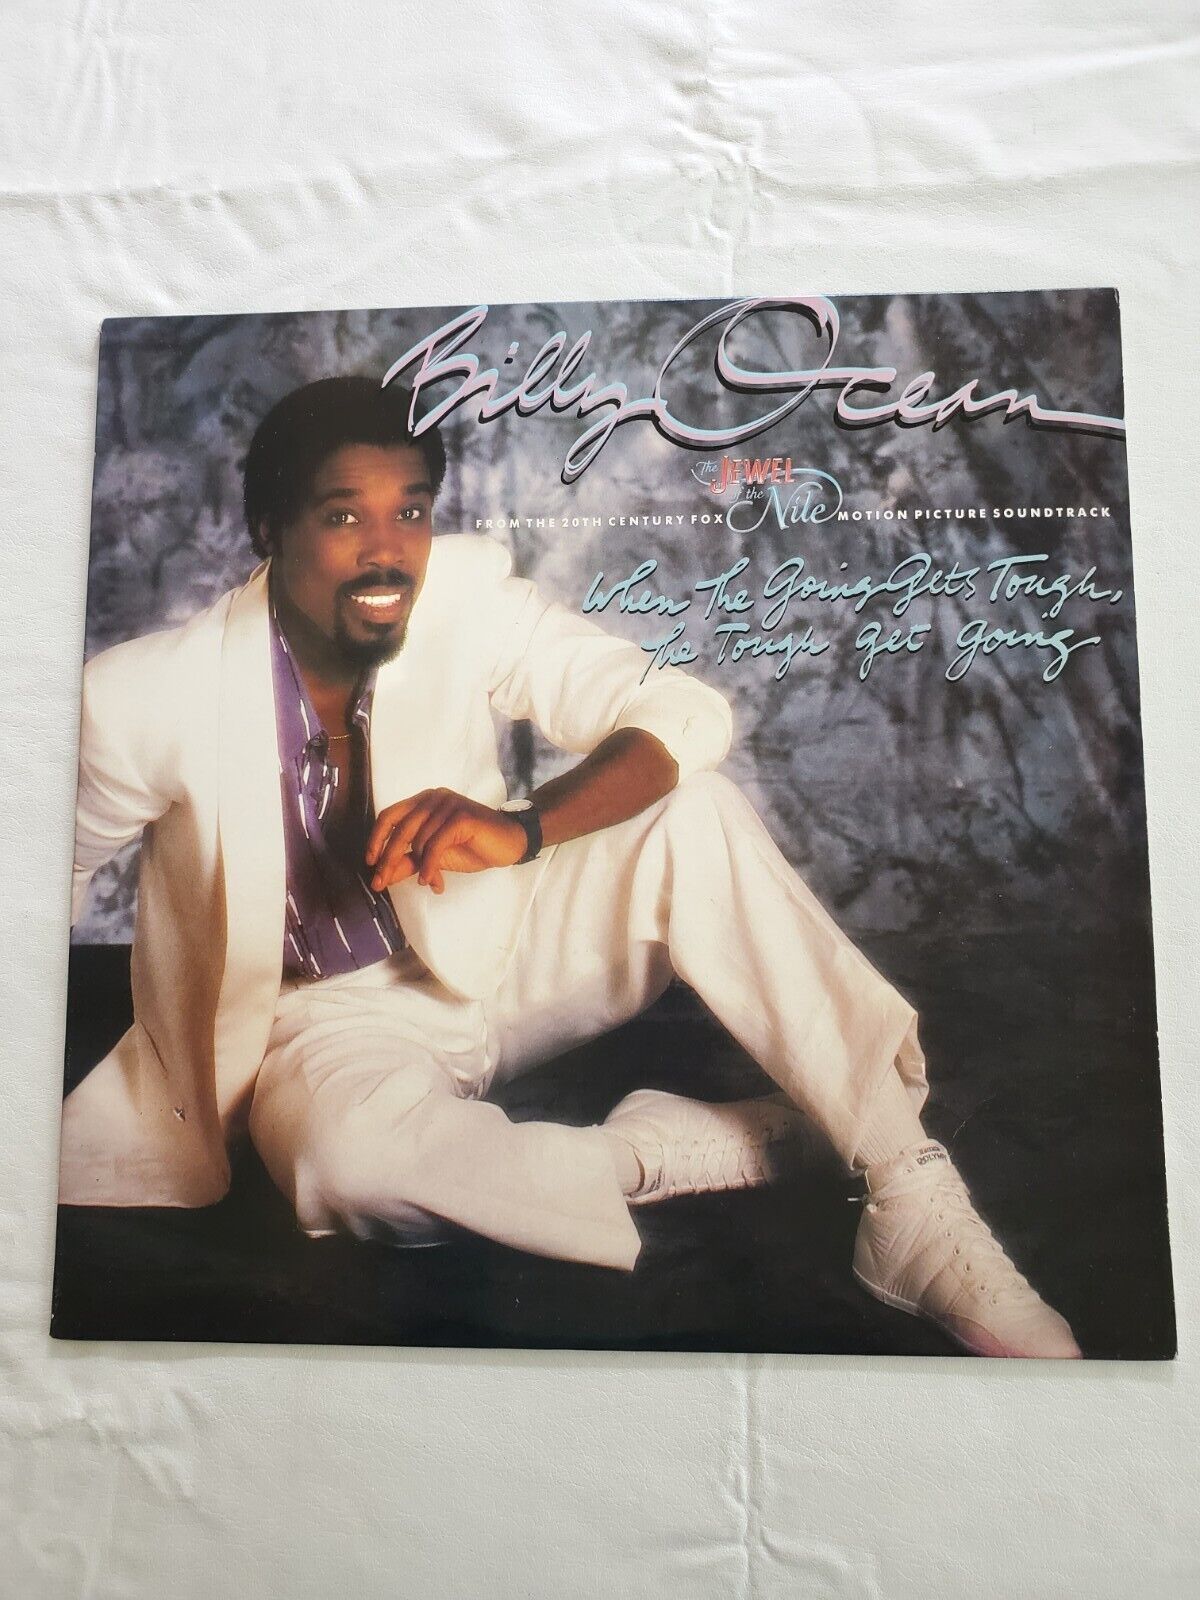 Billy Ocean - Single - From The Jewel of the Nile Motion Picture - LP VG+ Tested